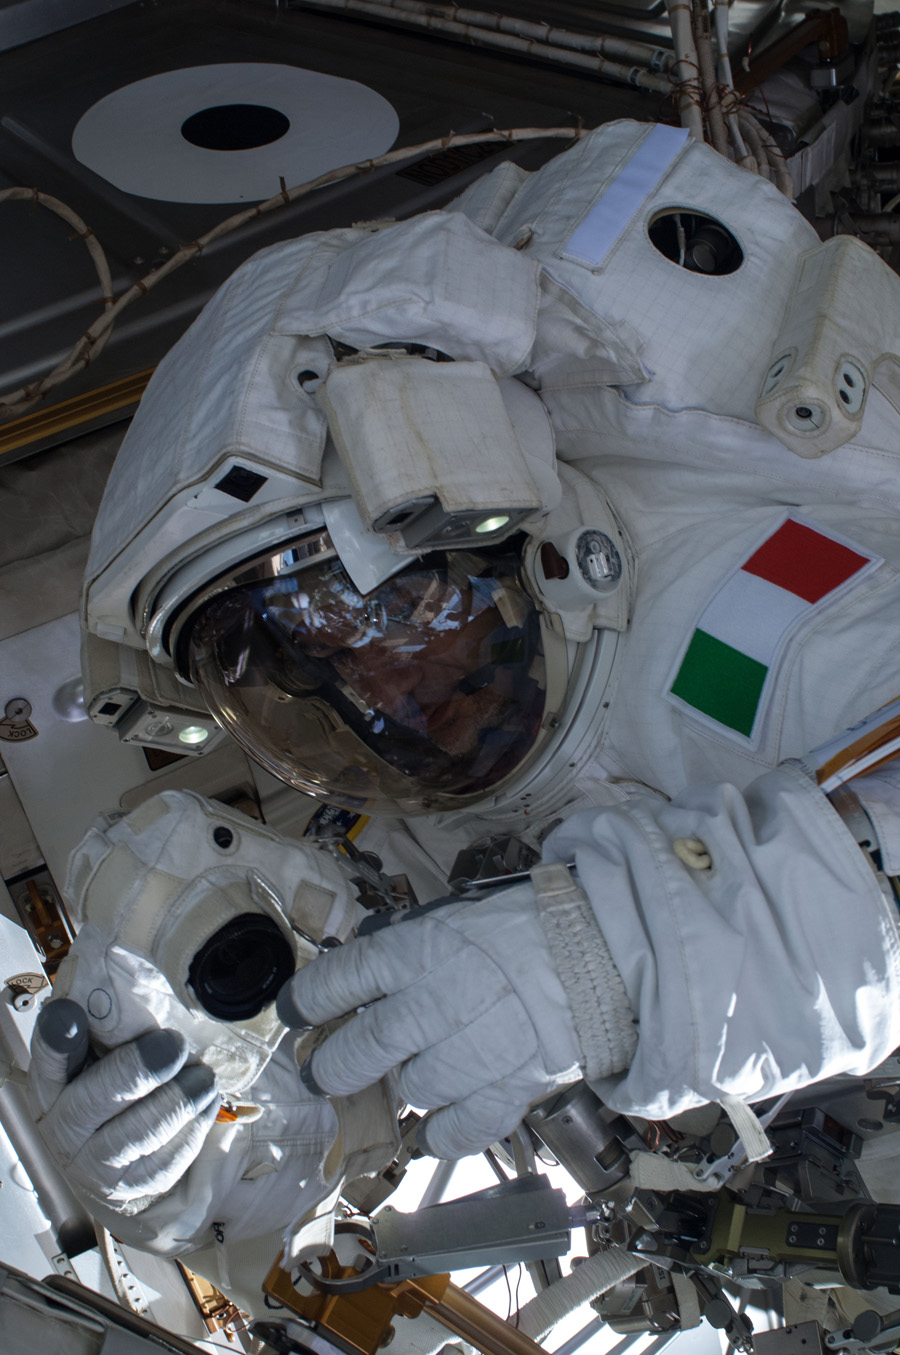 ESA astronaut Luca Parmitano works on the International Space Station on a July 16, 2013 spacewalk.  A little more than one hour into the spacewalk, Parmitano reported water floating behind his head inside his helmet.  The water was not an immediate health hazard for Parmitano, but Mission Control decided to end the spacewalk early.  This image was released July 16, 2013.